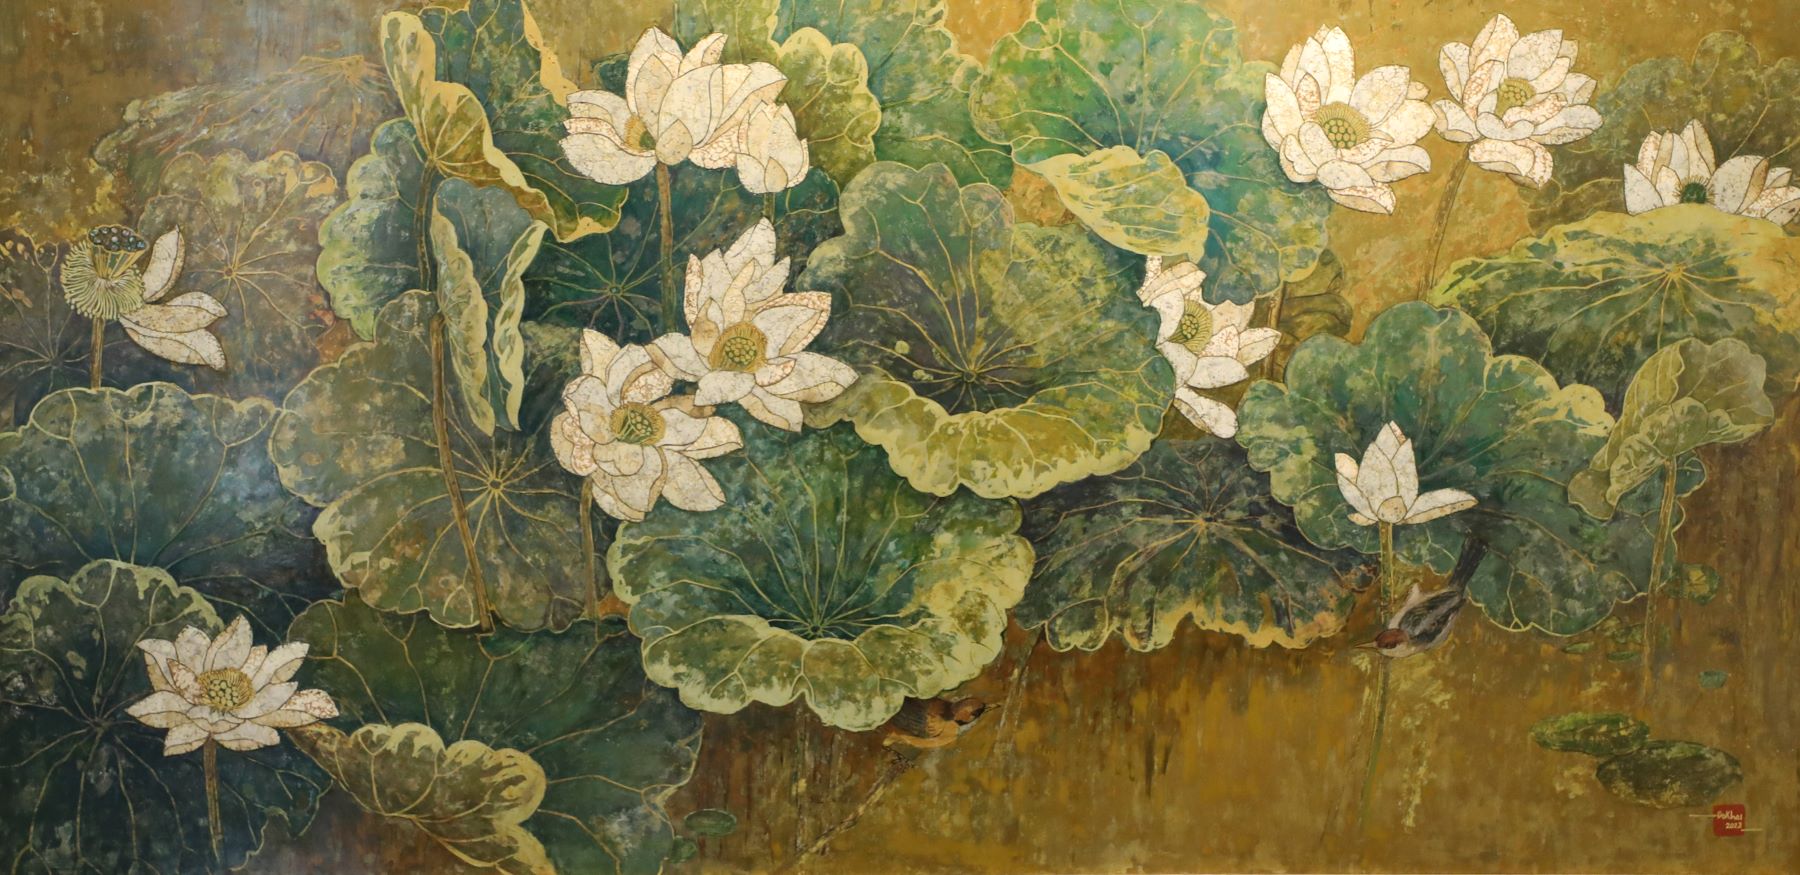 Pond of White Lotus - Vietnamese Lacquer Painting by Artist Do Khai